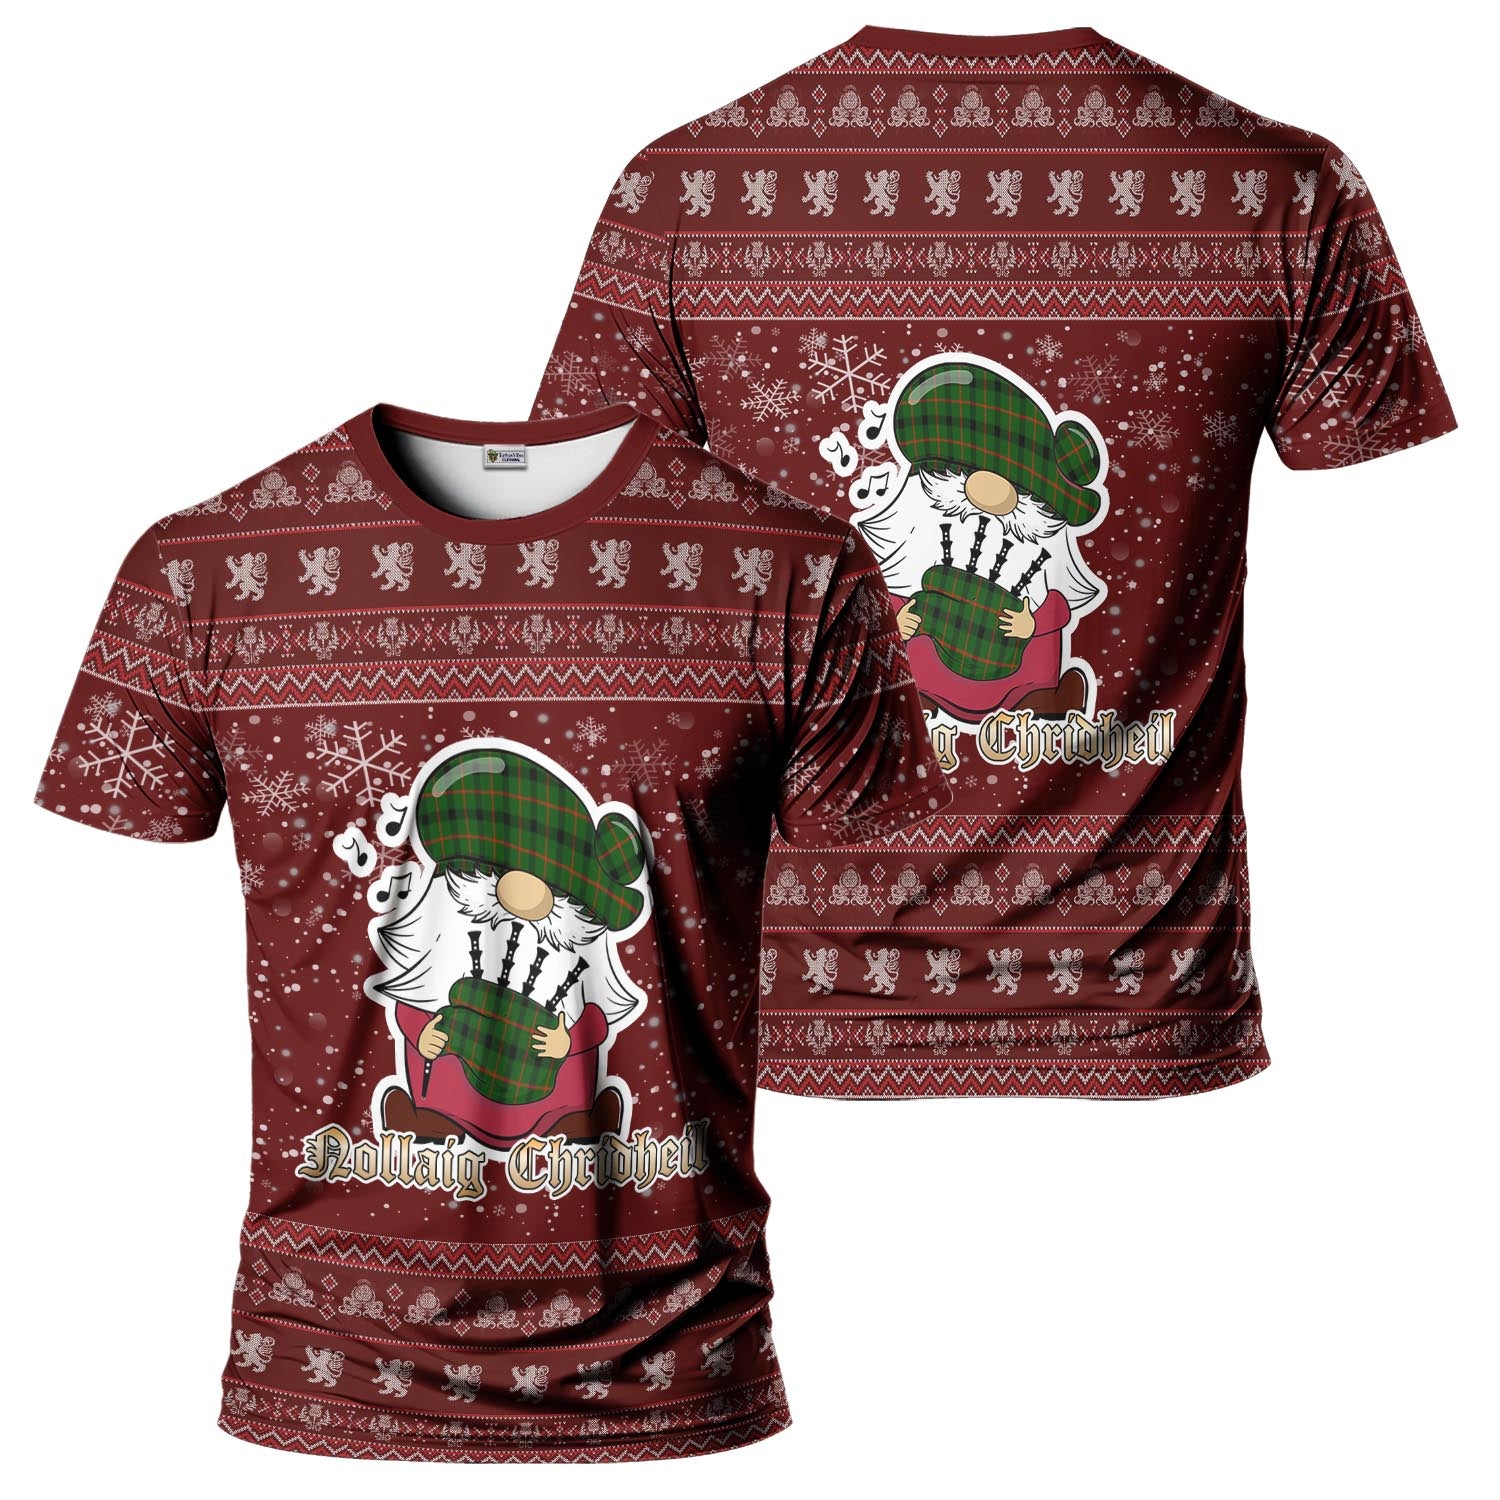 Kincaid Modern Clan Christmas Family T-Shirt with Funny Gnome Playing Bagpipes - Tartanvibesclothing